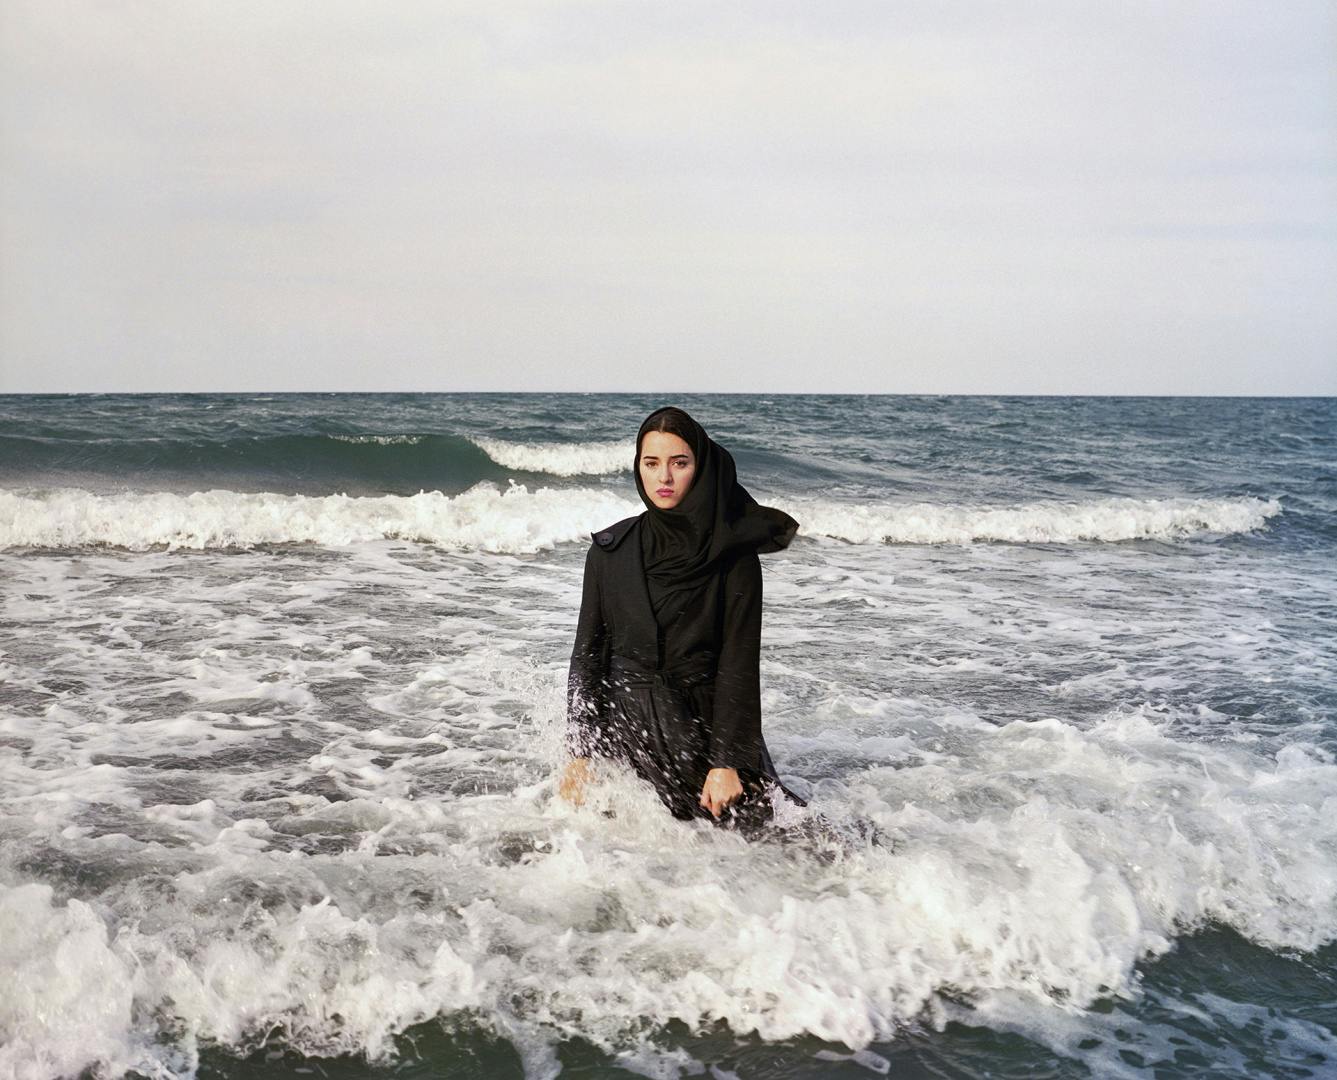 Photograph by Newsha Tavakolian showing a young woman wearing hijab and dark attire stood in the sea at the shore